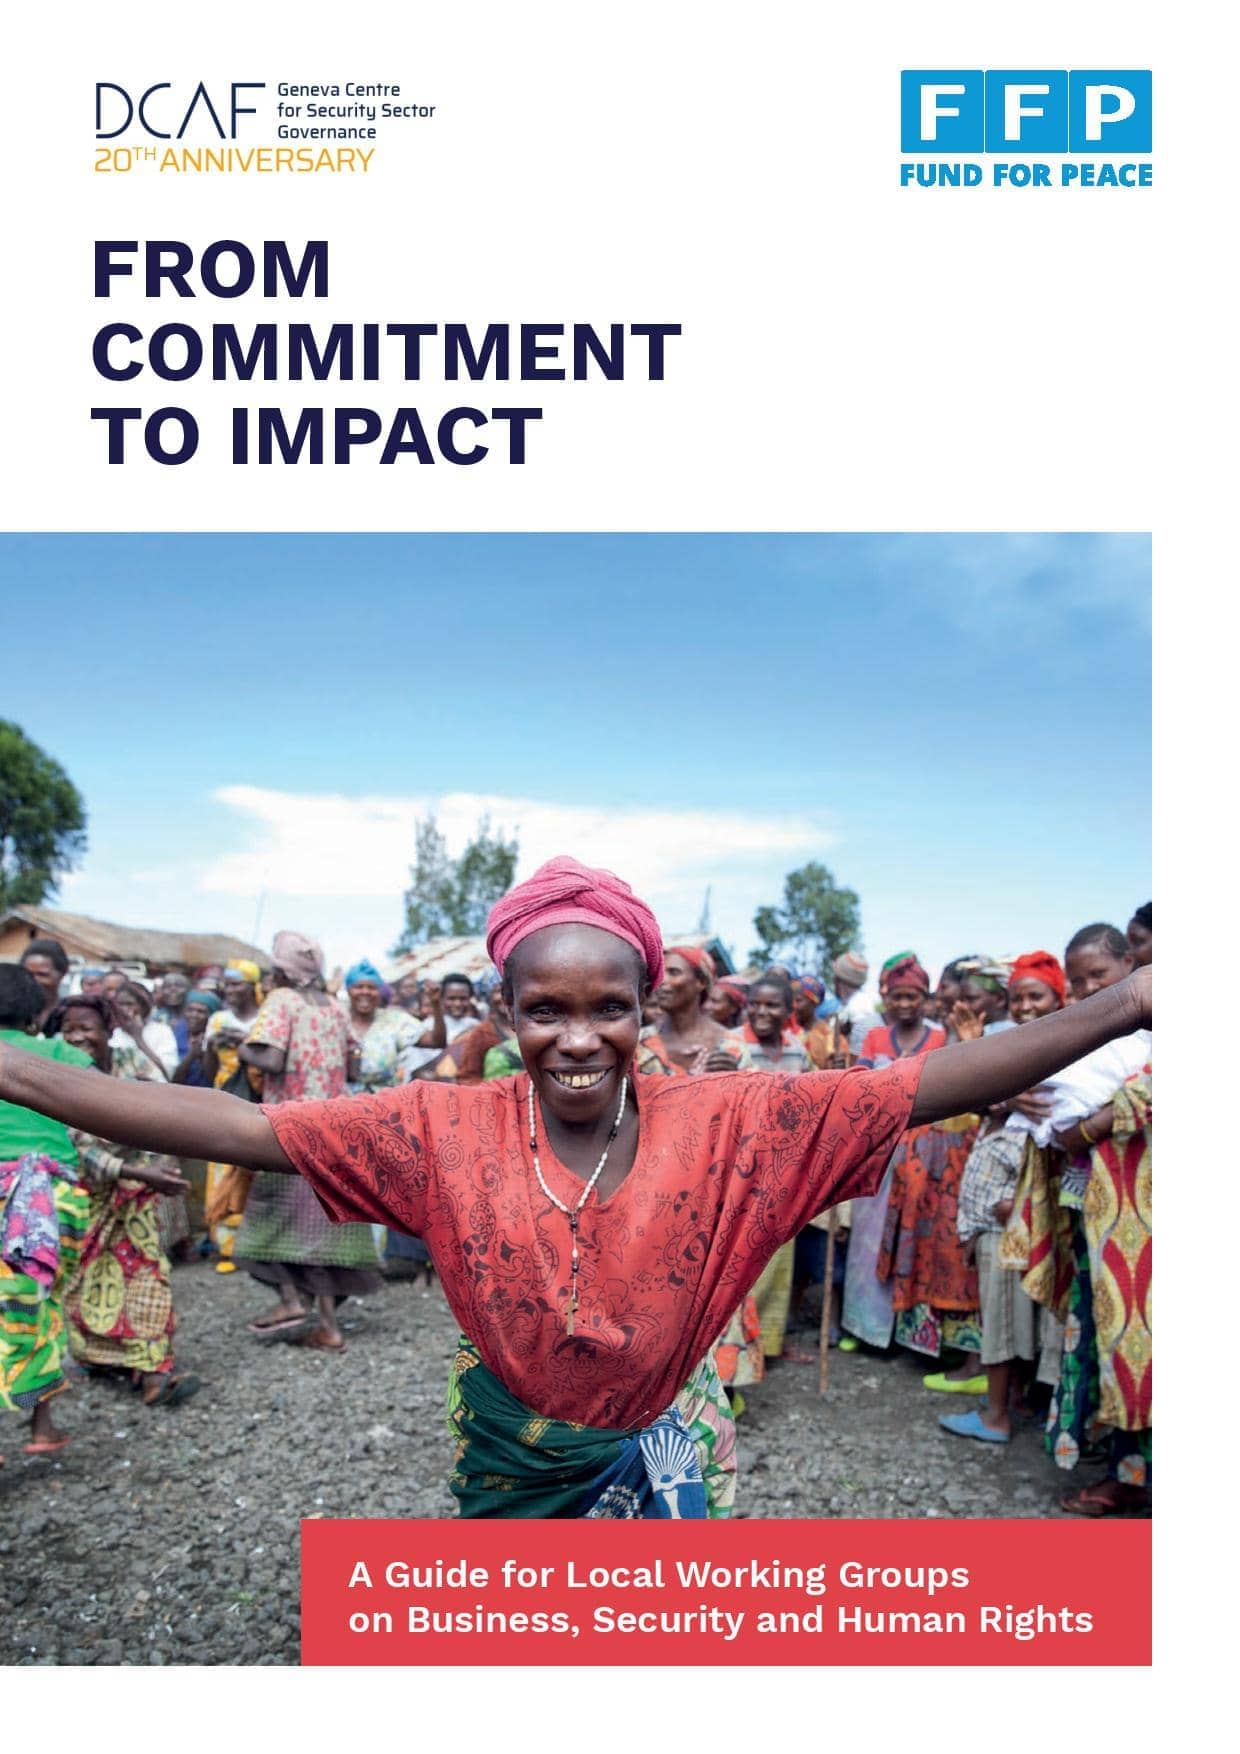 From Commitment to Impact: A Guide for Local Working Groups on Business, Security and Human Rights (DCAF and Fund For Peace FFP)